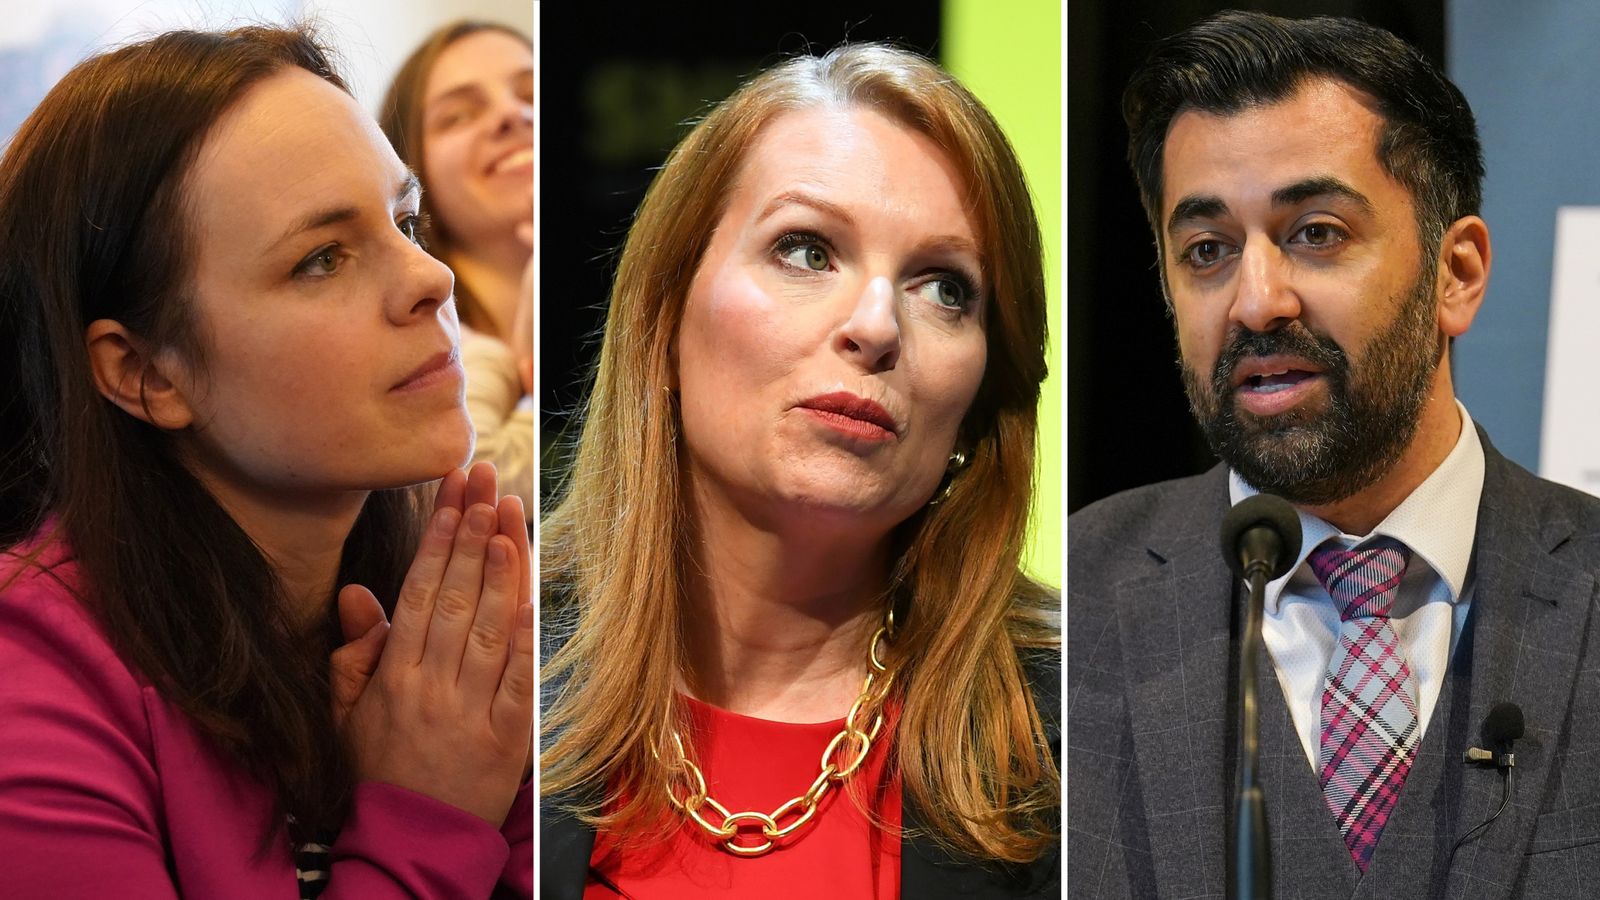 'Scotland lost its way': SNP candidates clash on independence in fiery first TV debate 